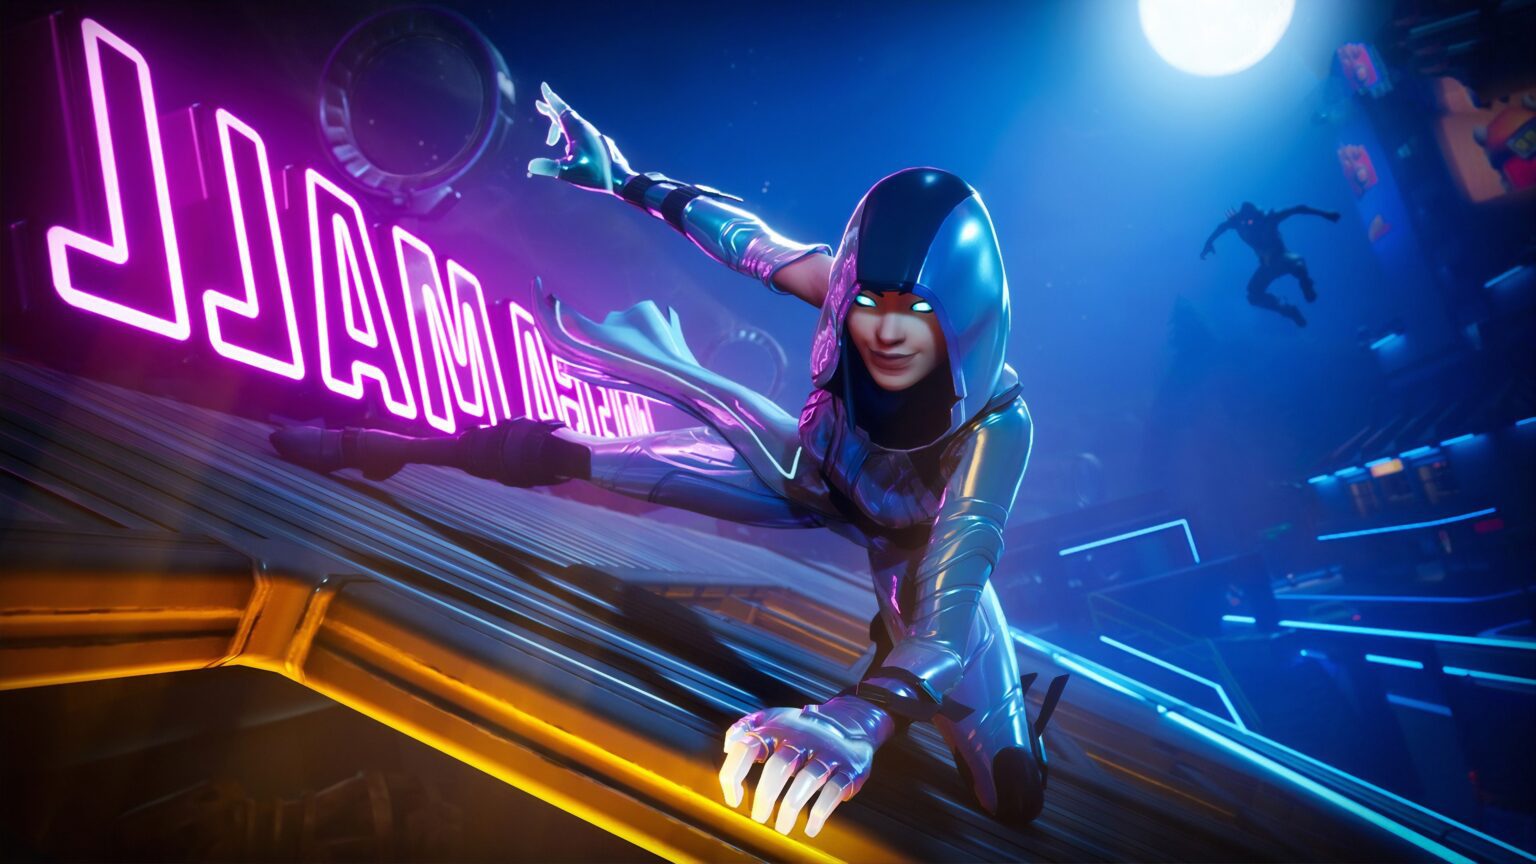 How To Get The Free Samsung Glow Skin In Fortnite